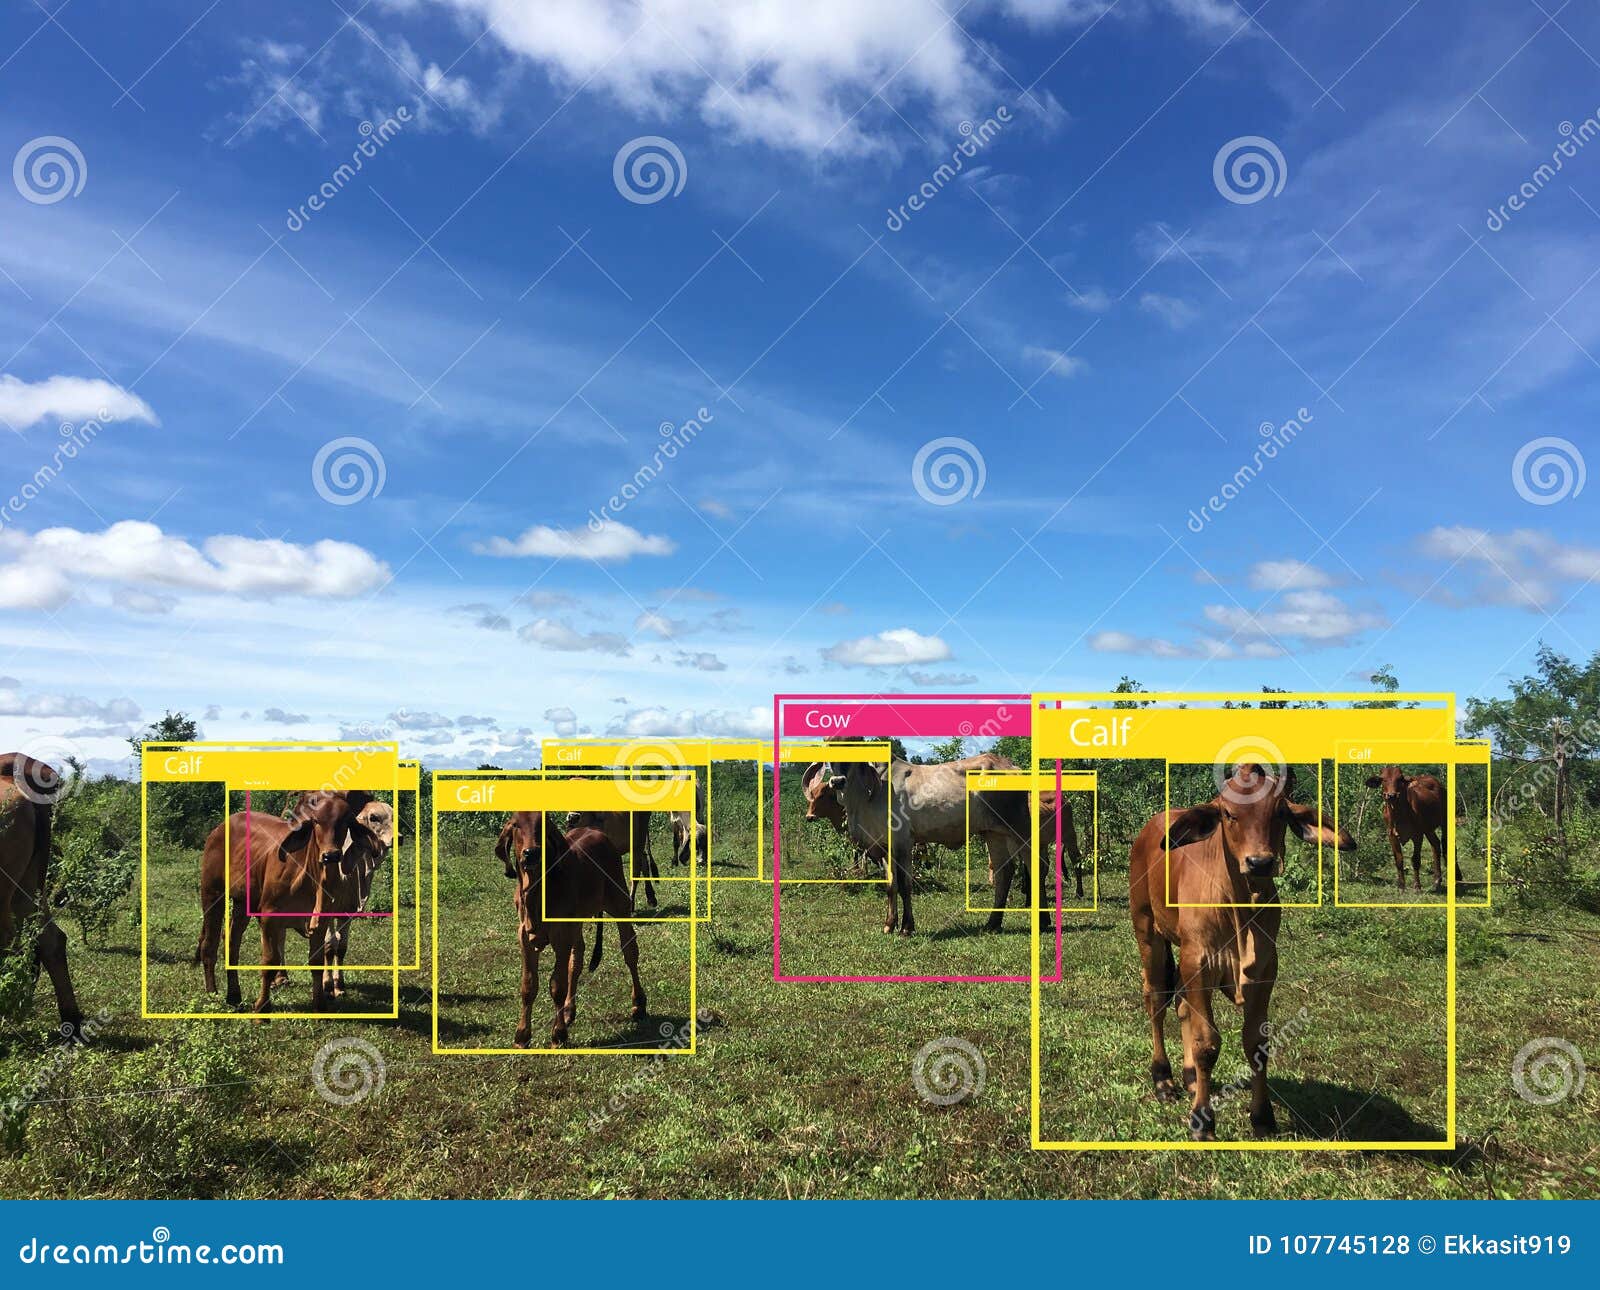 iot machine learning with human and object recognition which use artificial intelligence to measurements ,analytic and identical c